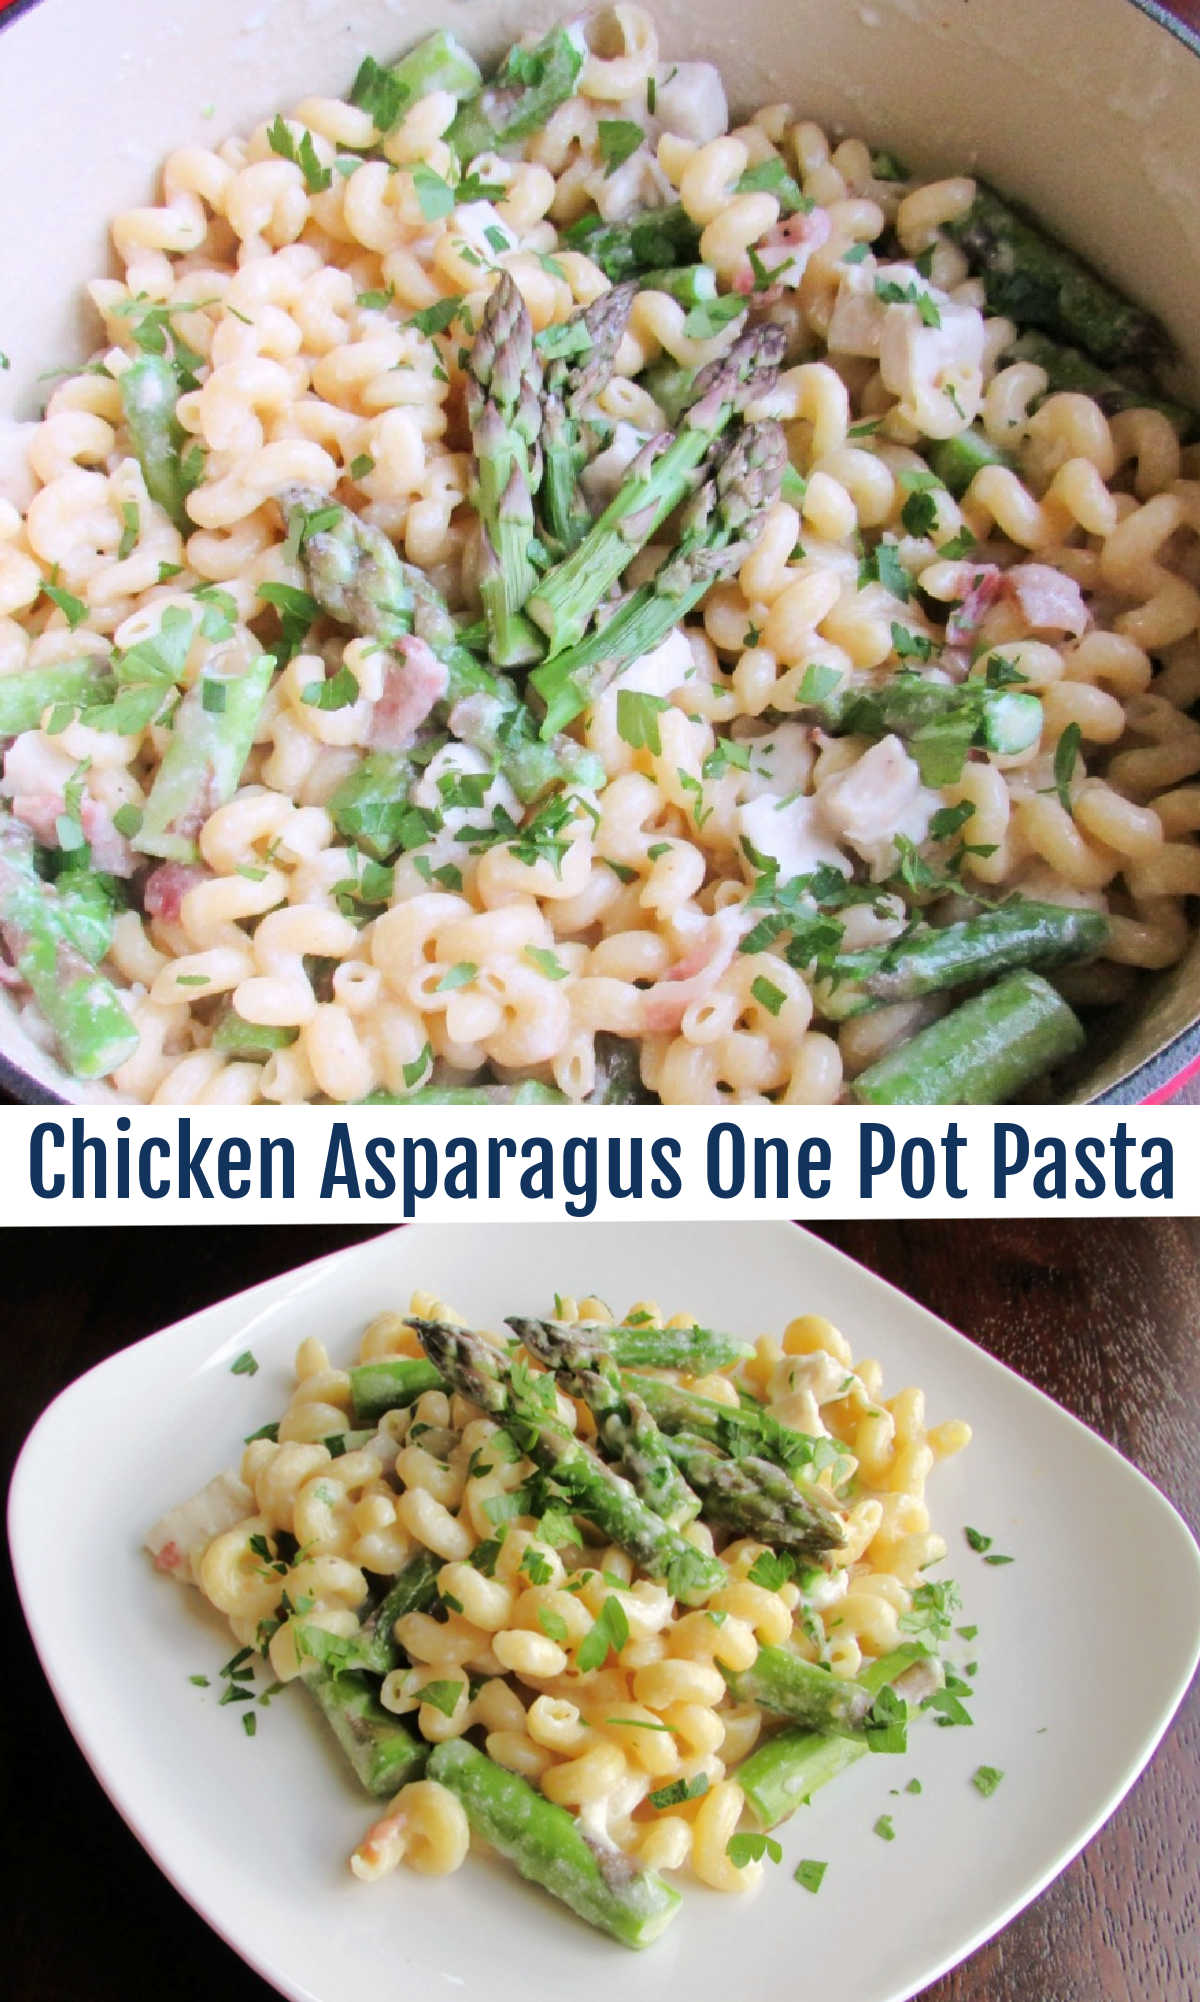 This complete dinner comes together in one pot in under a half hour! Chicken, bacon, and asparagus in a creamy pasta with almost no dishes to do!